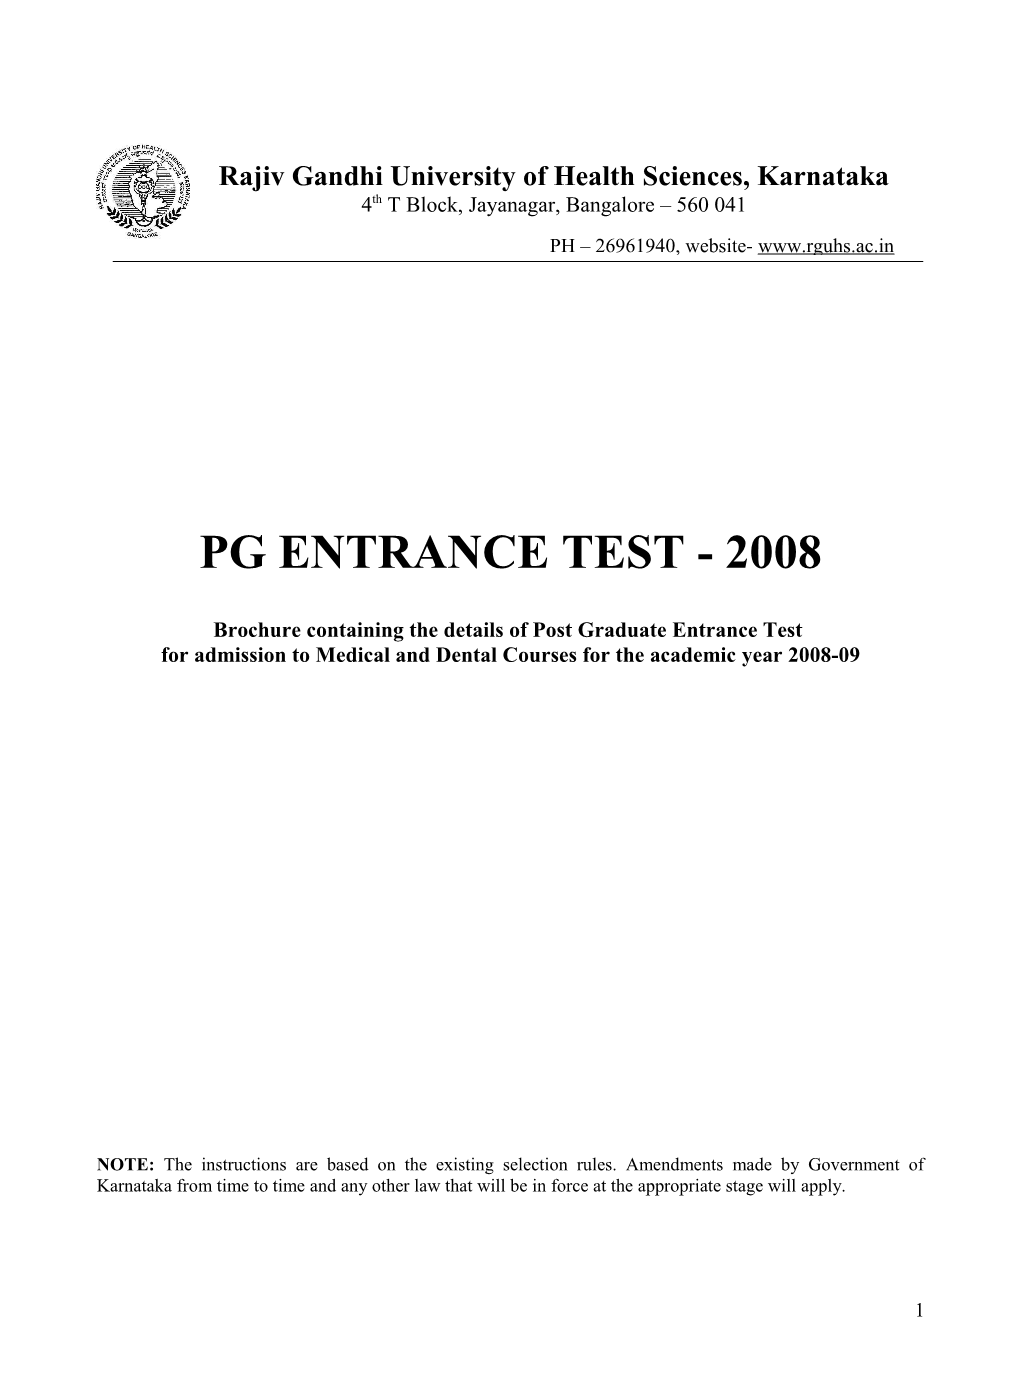 Brochure Containing the Details of Post Graduate Entrance Test